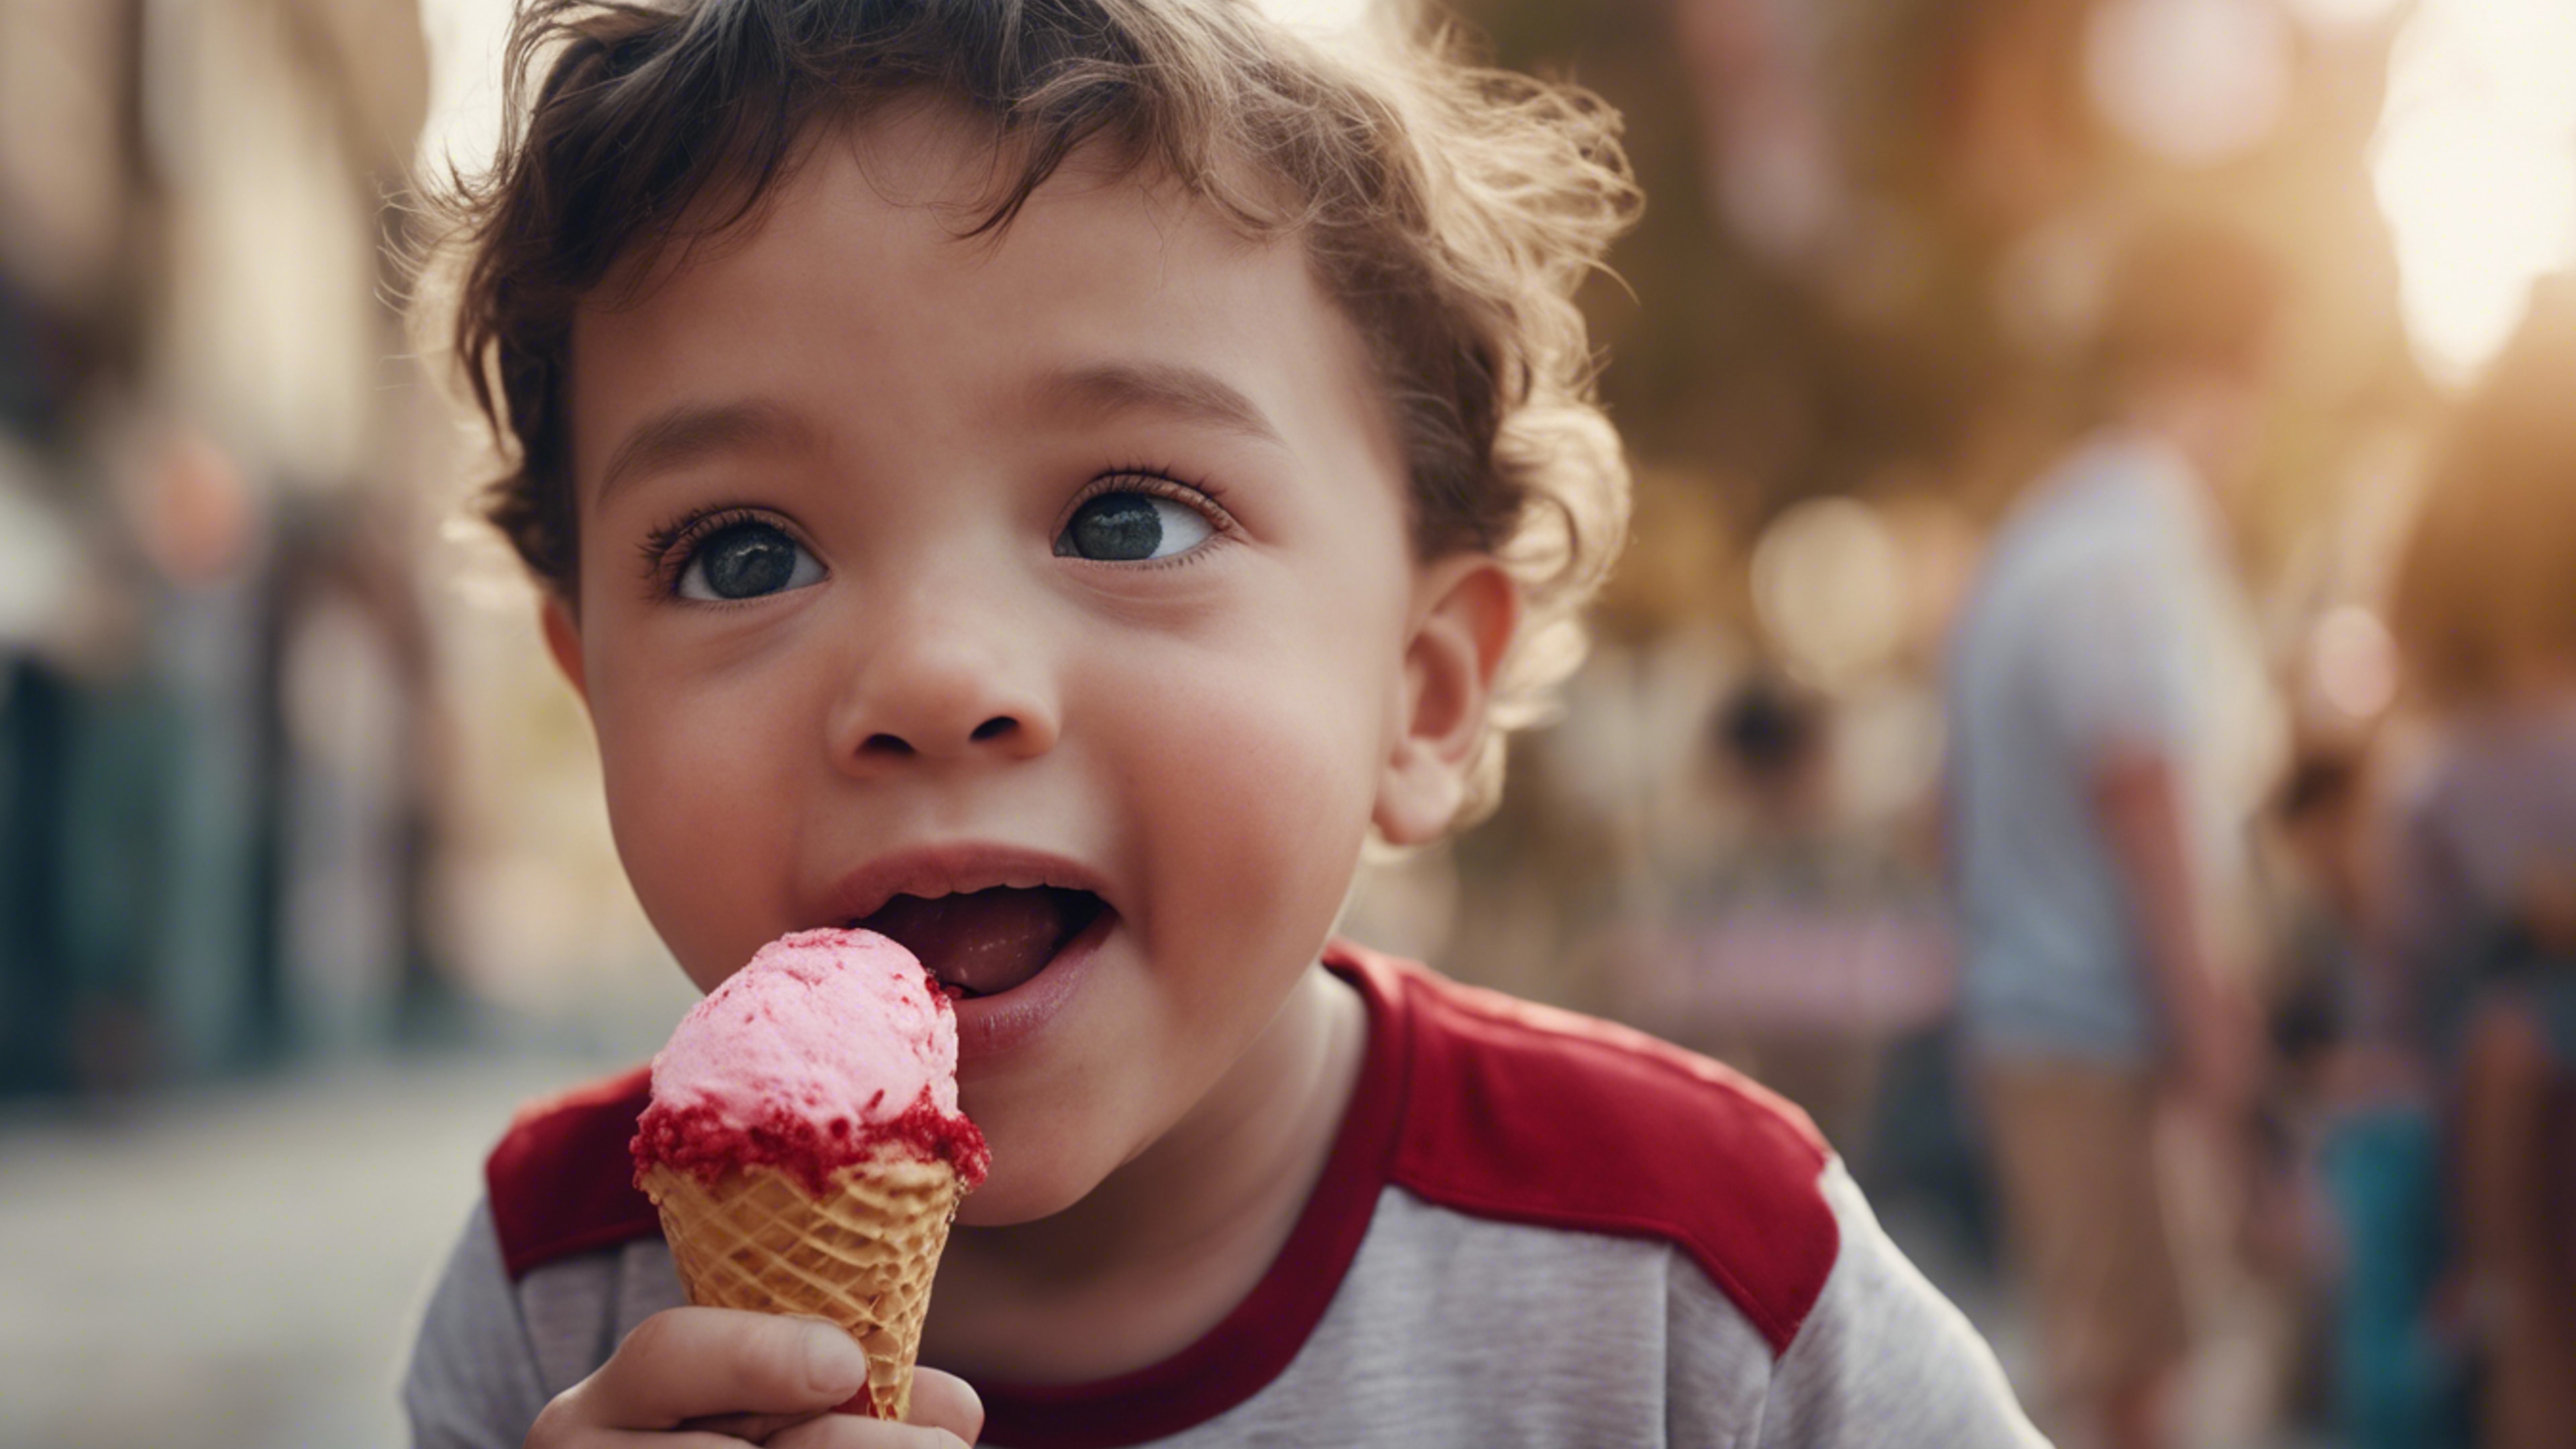 A small child delighting in a red velvet ice cream cone, with a wide-eyed expression of joy on his face. Papel de parede[7a3fbd1e60614c42931f]